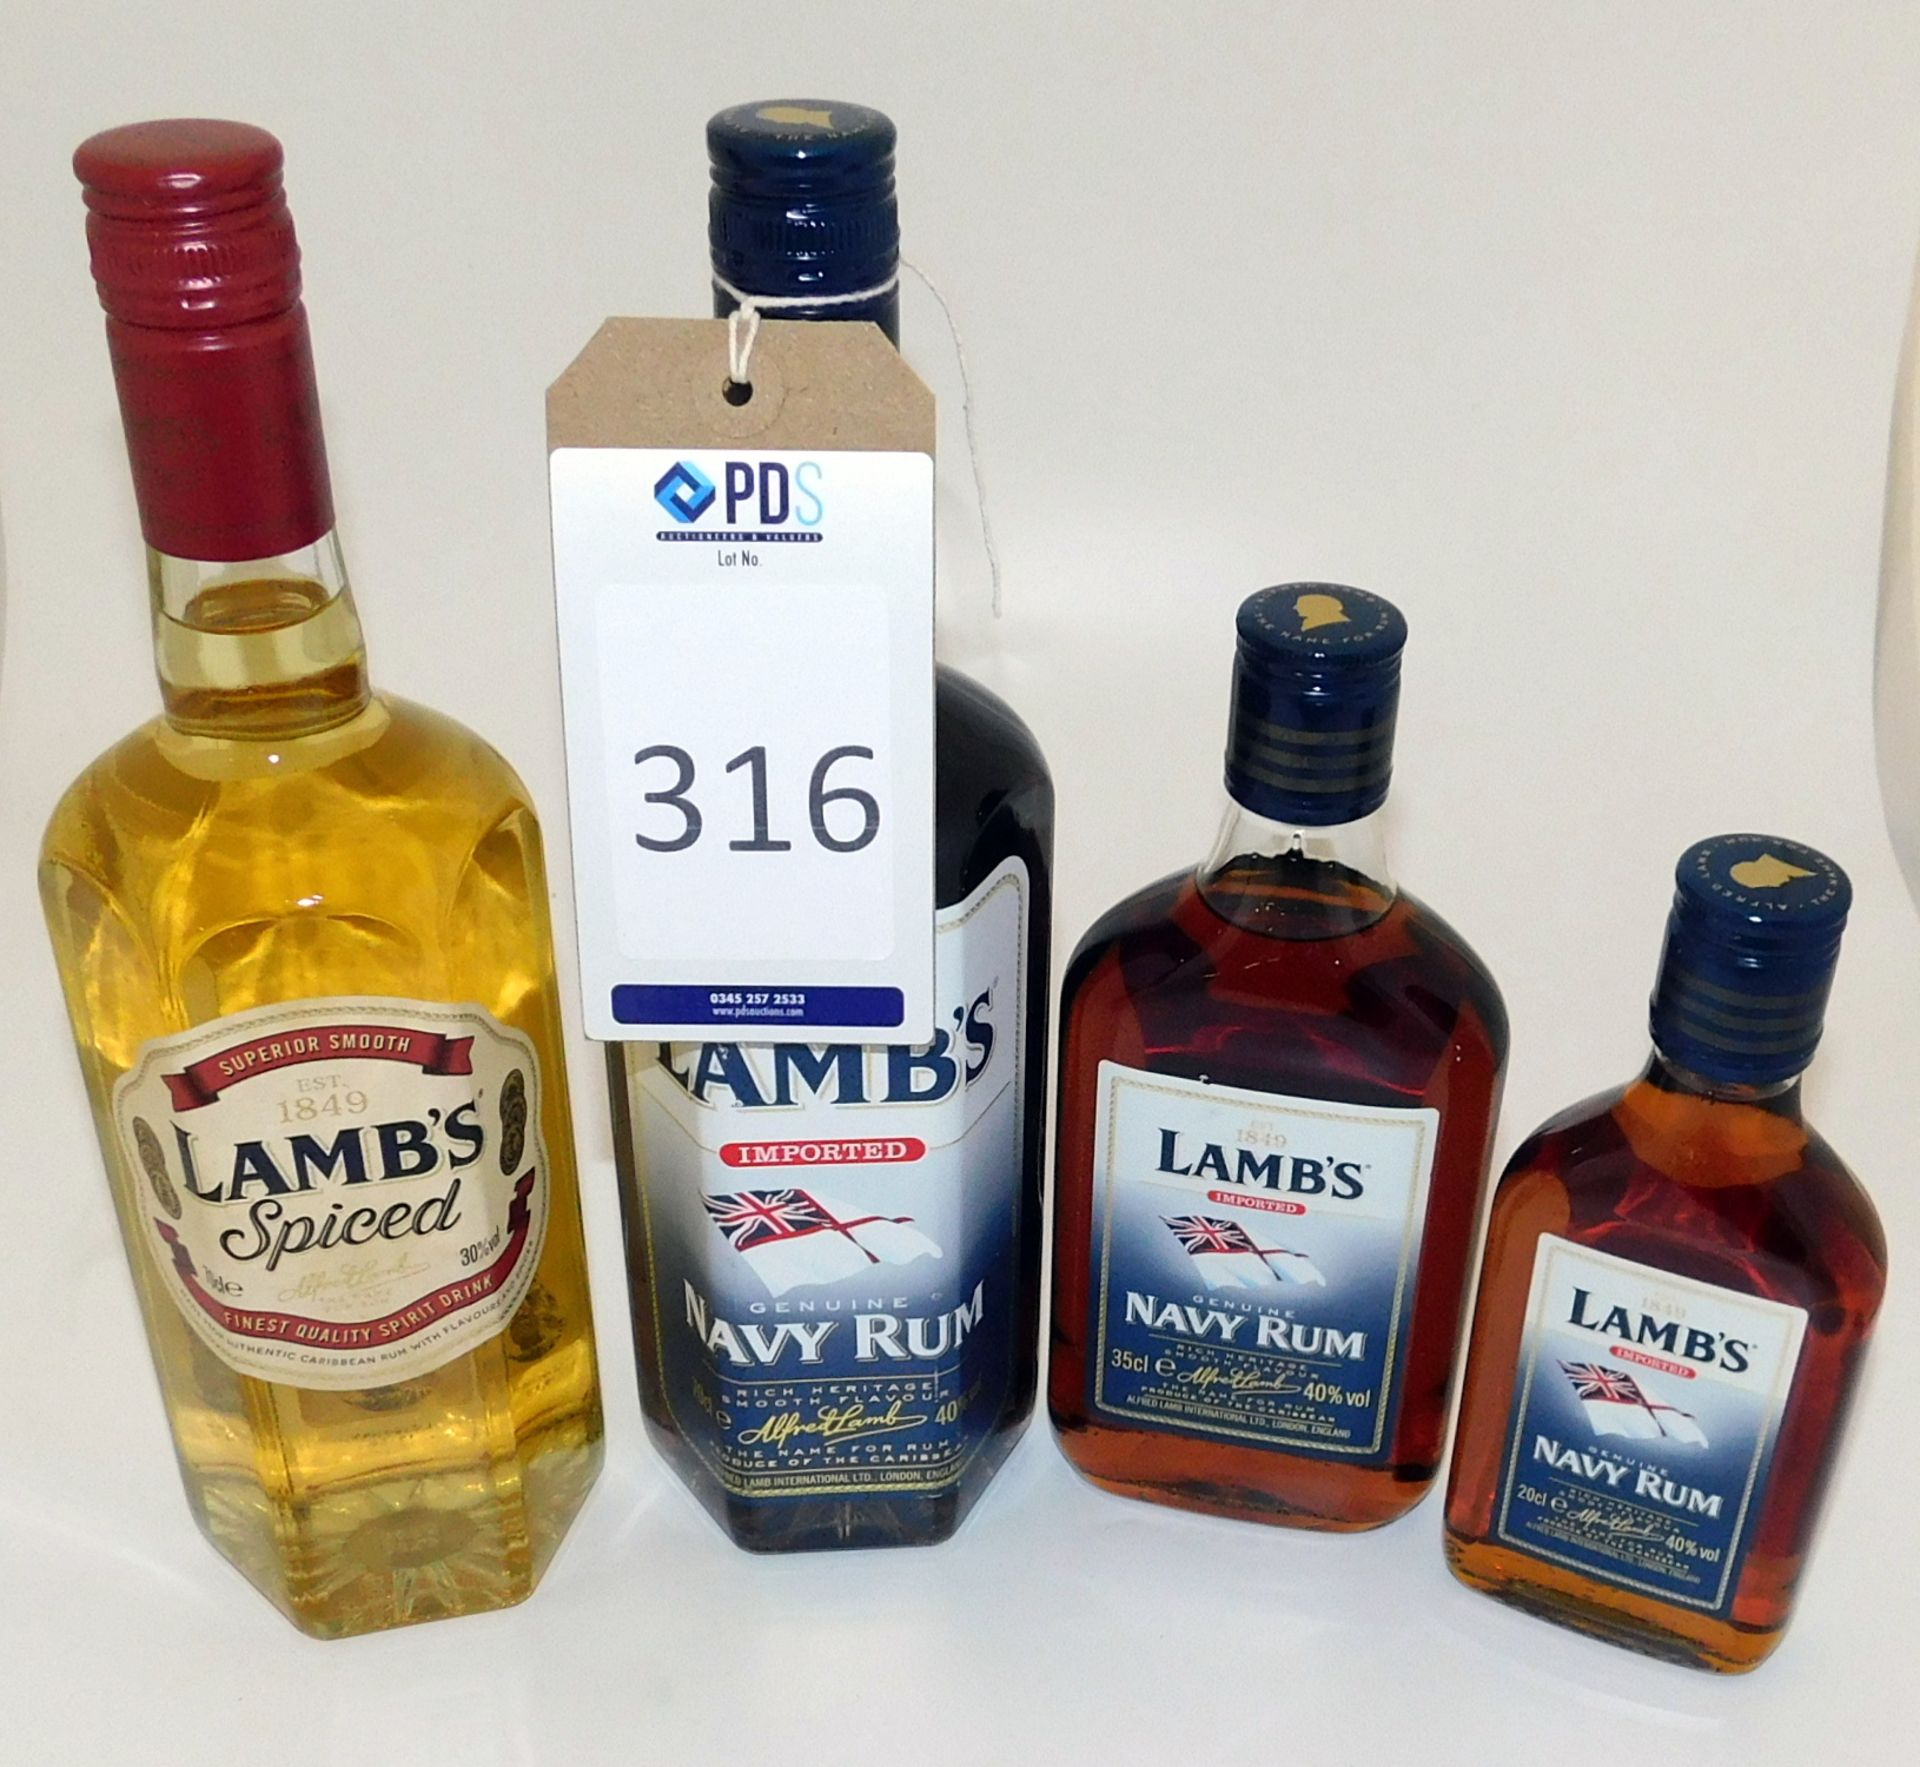 13 Bottles of Lamb’s to Include 5 Spiced Spirit Drink, 70cl, 4 Genuine Navy Rum, 70cl, 1 Genuine